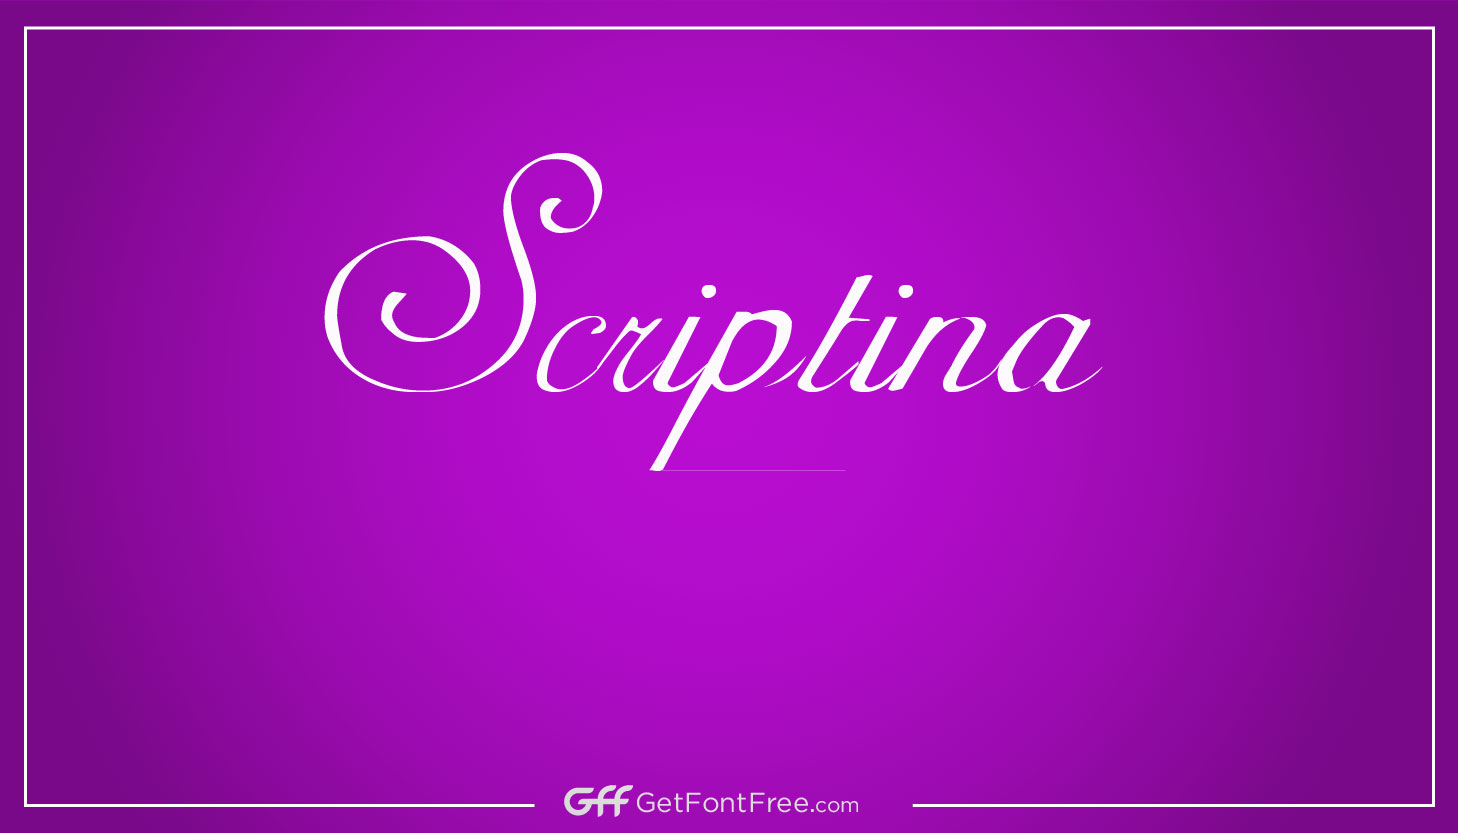 Scriptina Font is a classic, elegant calligraphic font that has been popular among designers and typographers for many years. Originally designed by A. de La Bouillerie in 2005, Scriptina Font quickly gained popularity due to its beautiful, flowing lines and classic calligraphic style. This font is perfect for a wide range of design projects, including wedding invitations, greeting cards, posters, logos, and more.